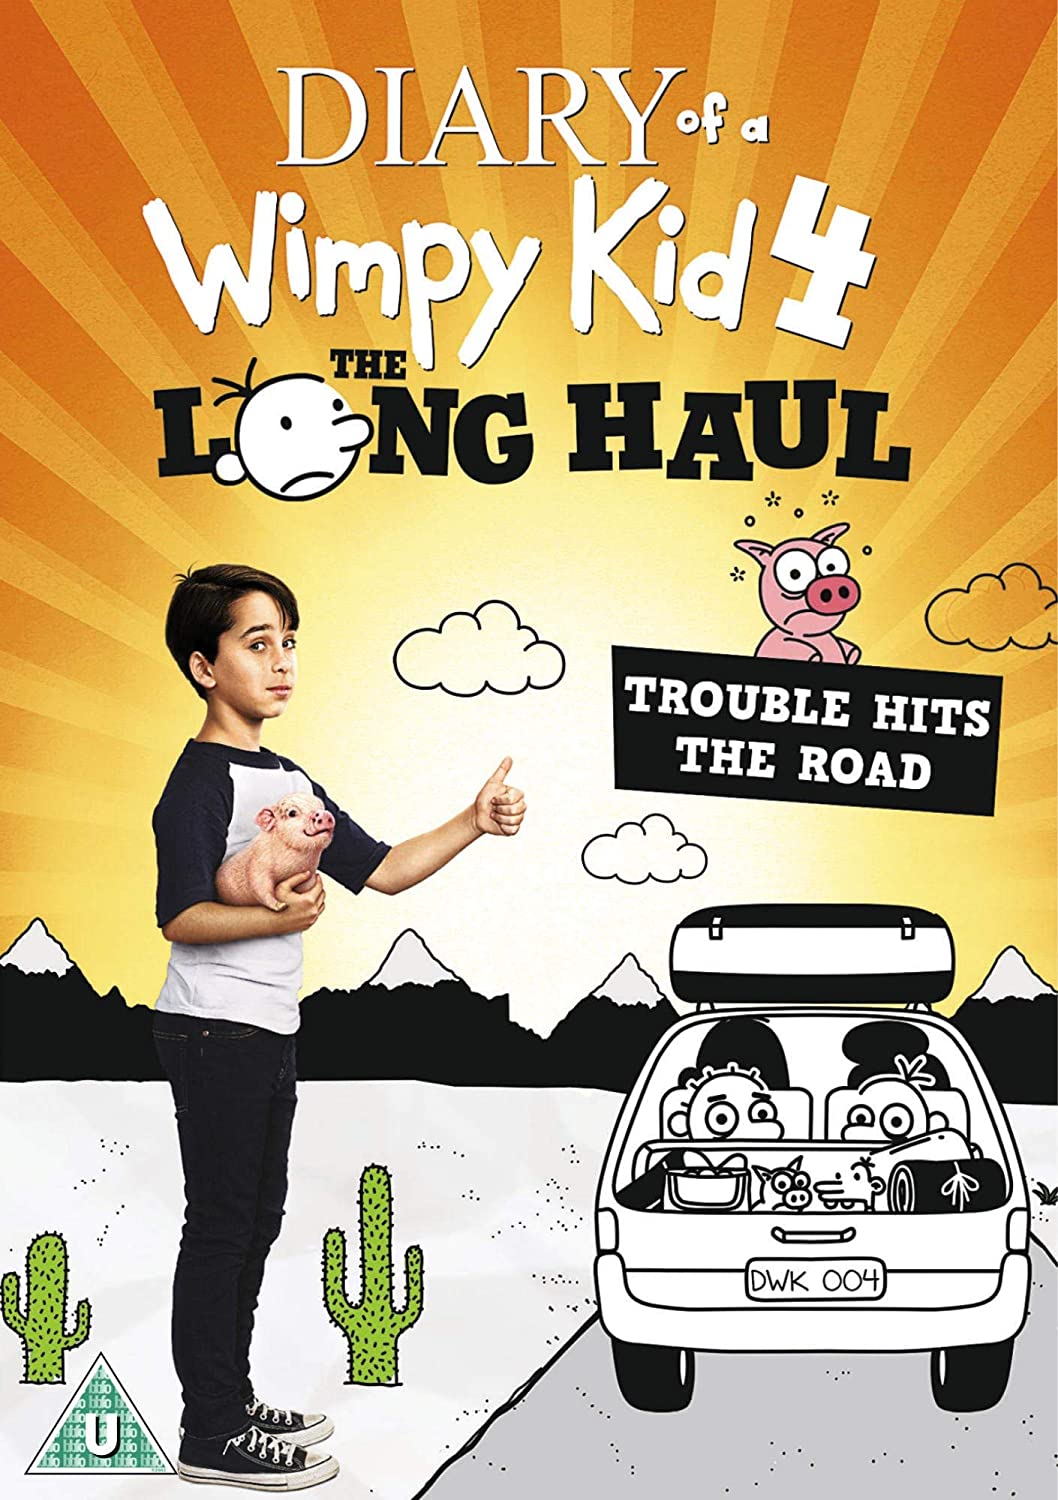 Diary Of A Wimpy Kid 4 The Long Haul [DVD] [2017]